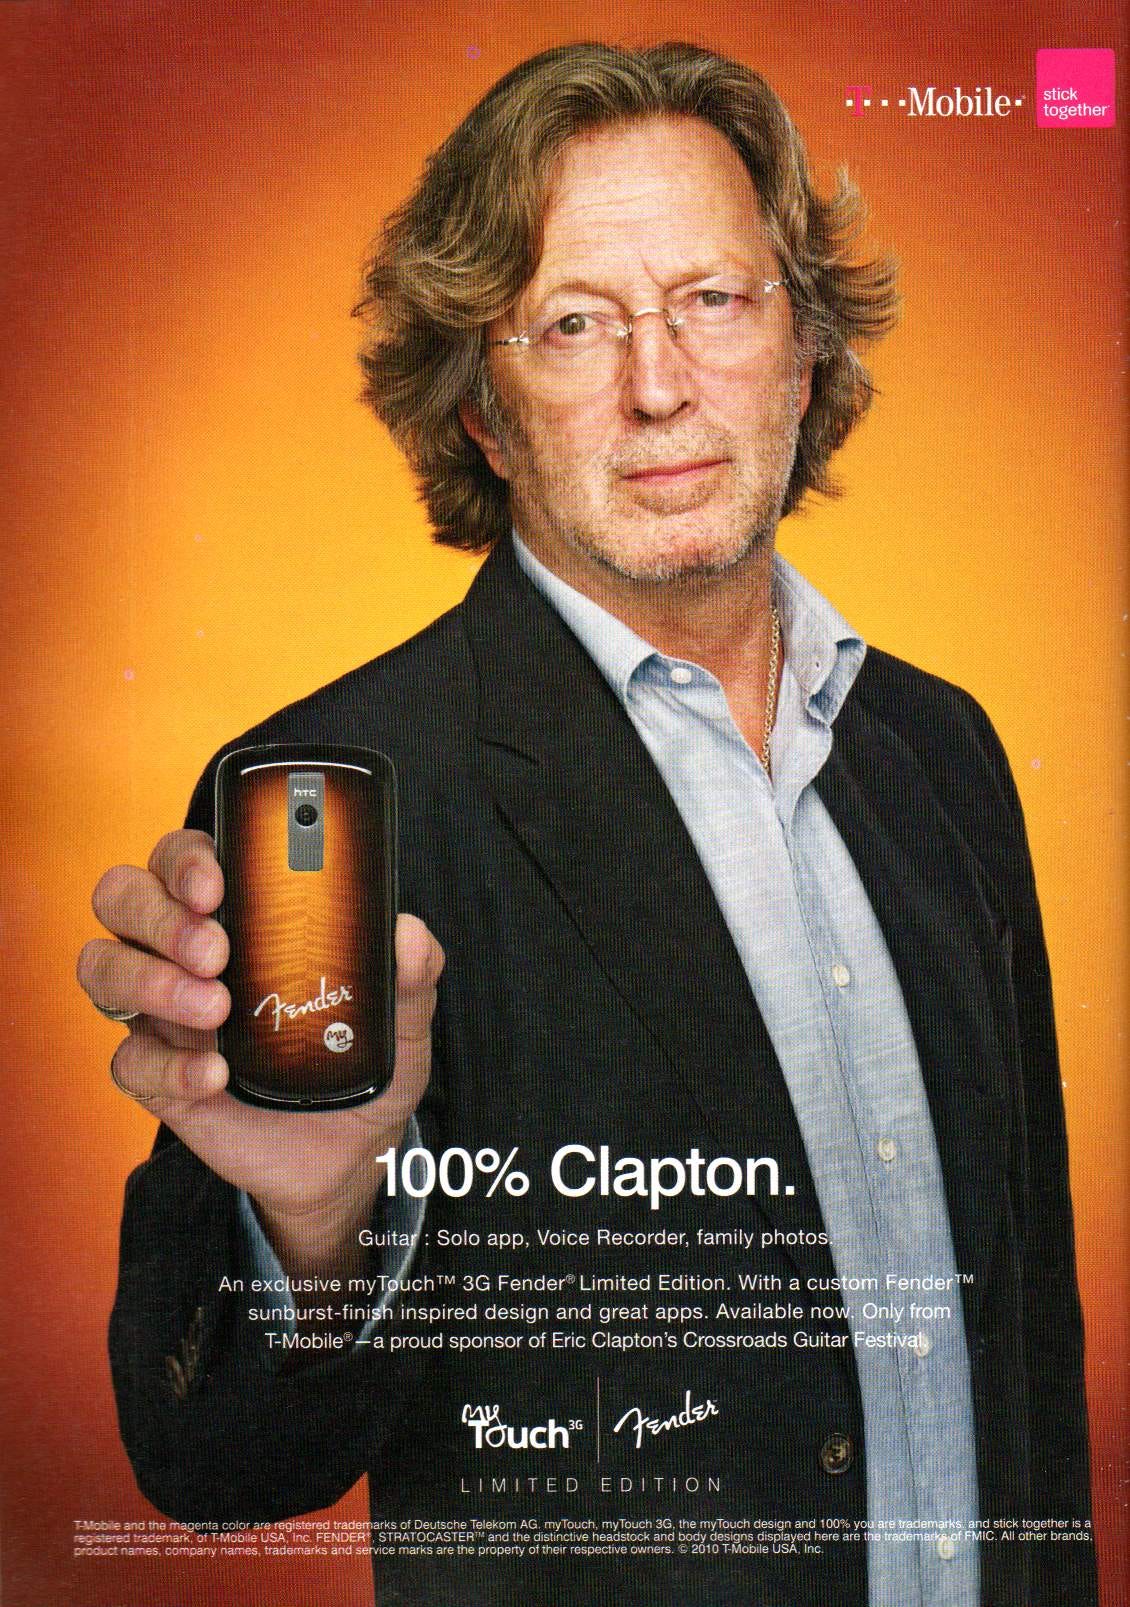 When Mobile Phone Ads Were Fun And Not Just So Boring My God1130 x 1607